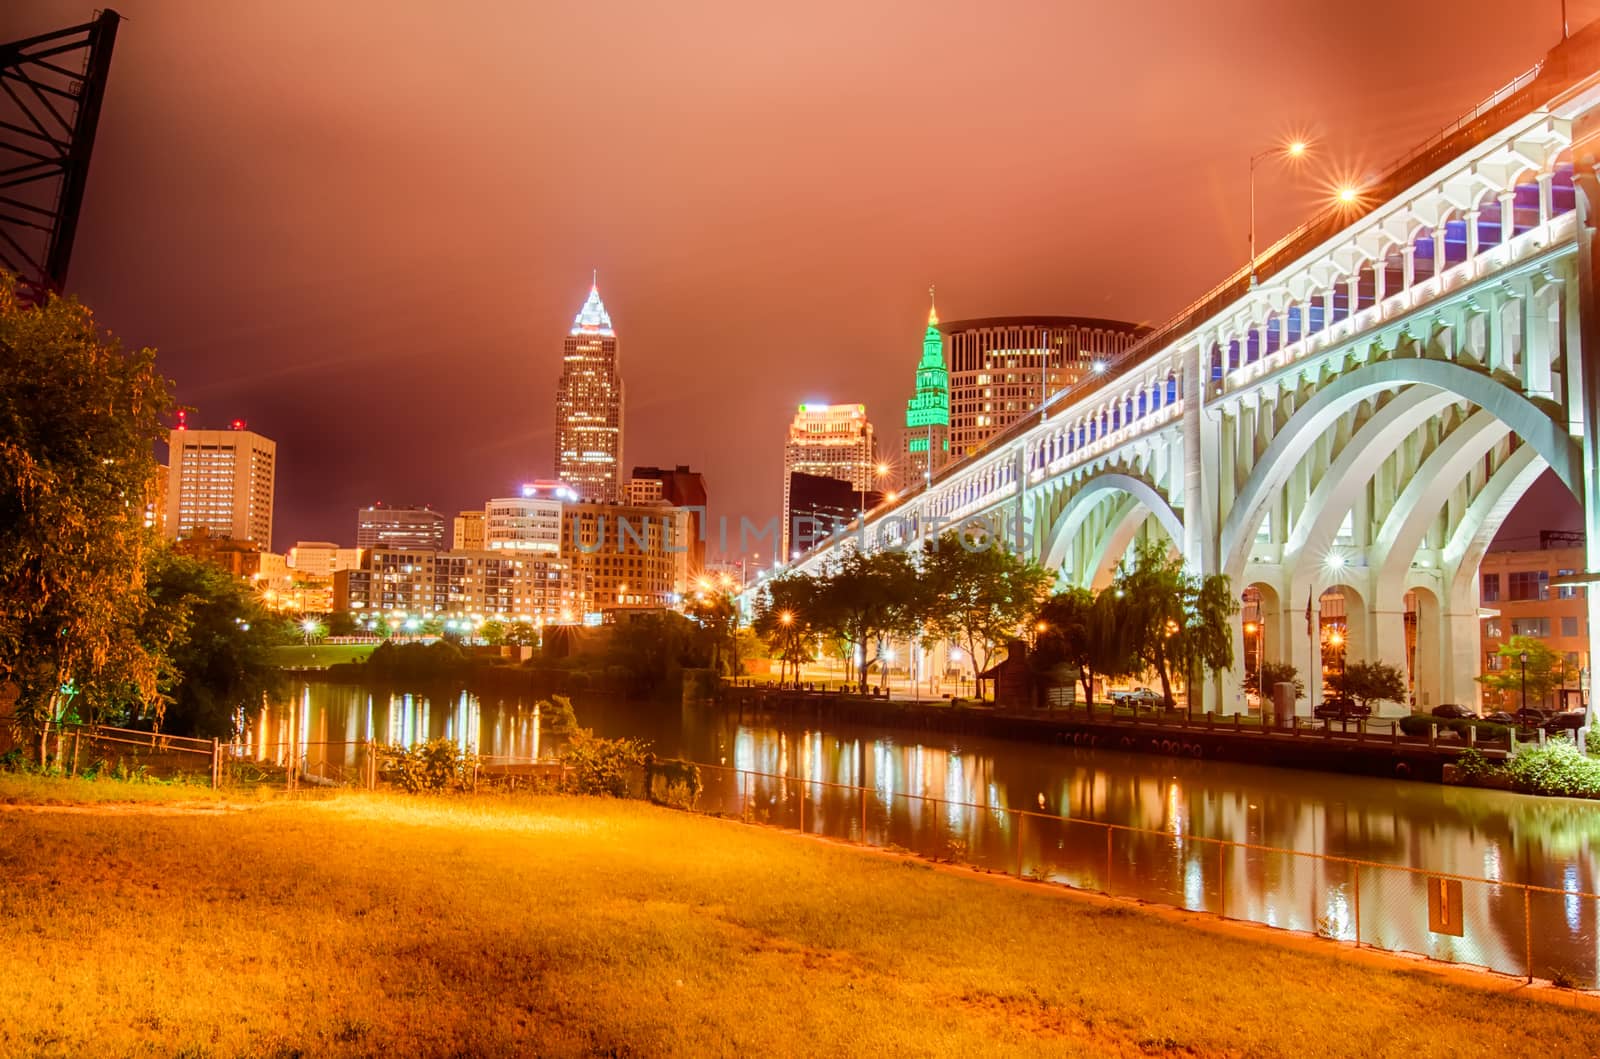 Cleveland. Image of Cleveland downtown at night